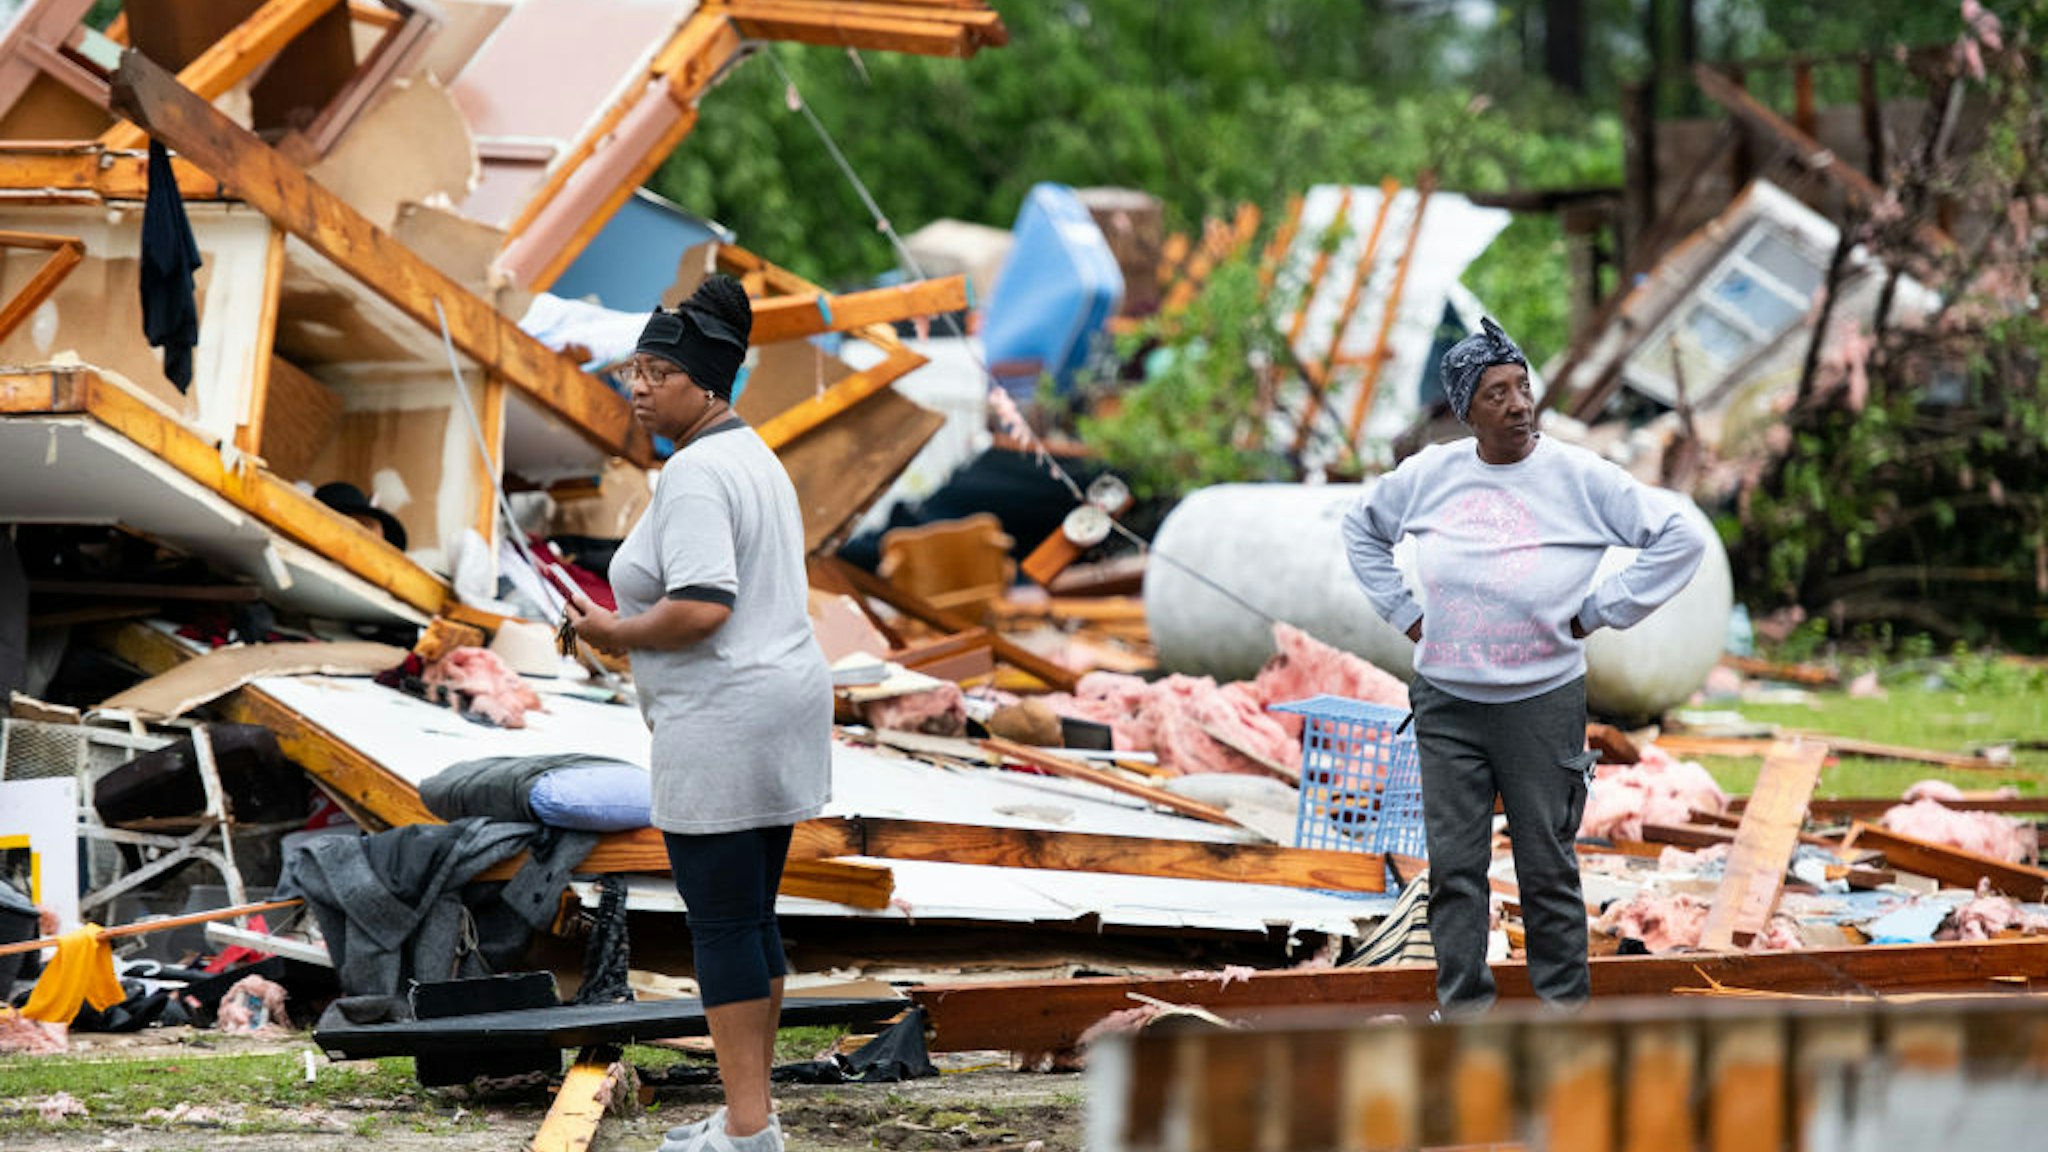 Sylvia Salley, right, and Evelyn Wise looks over what remains of a storm damaged home April 13, 2020 in Livingston, South Carolina. A string of storms caused more than a dozen deaths across the southern United States.